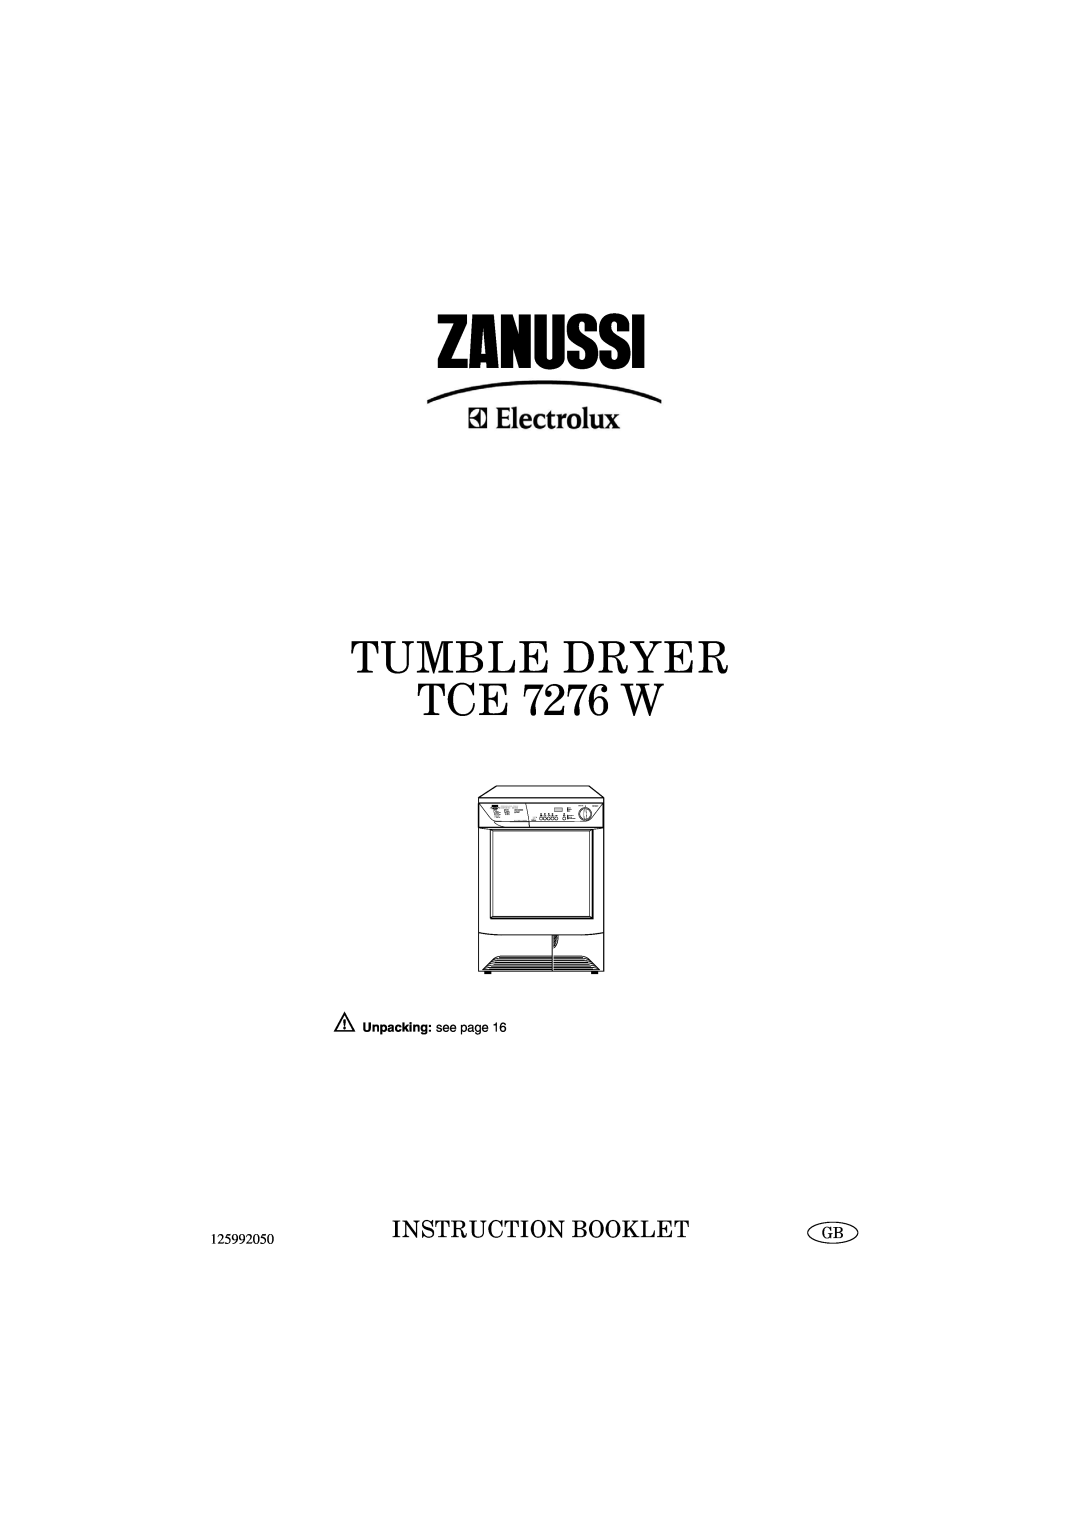 Zanussi manual TUMBLE DRYER TCE 7276 W, Instruction Booklet, Unpacking see page, Condenser Dryer 